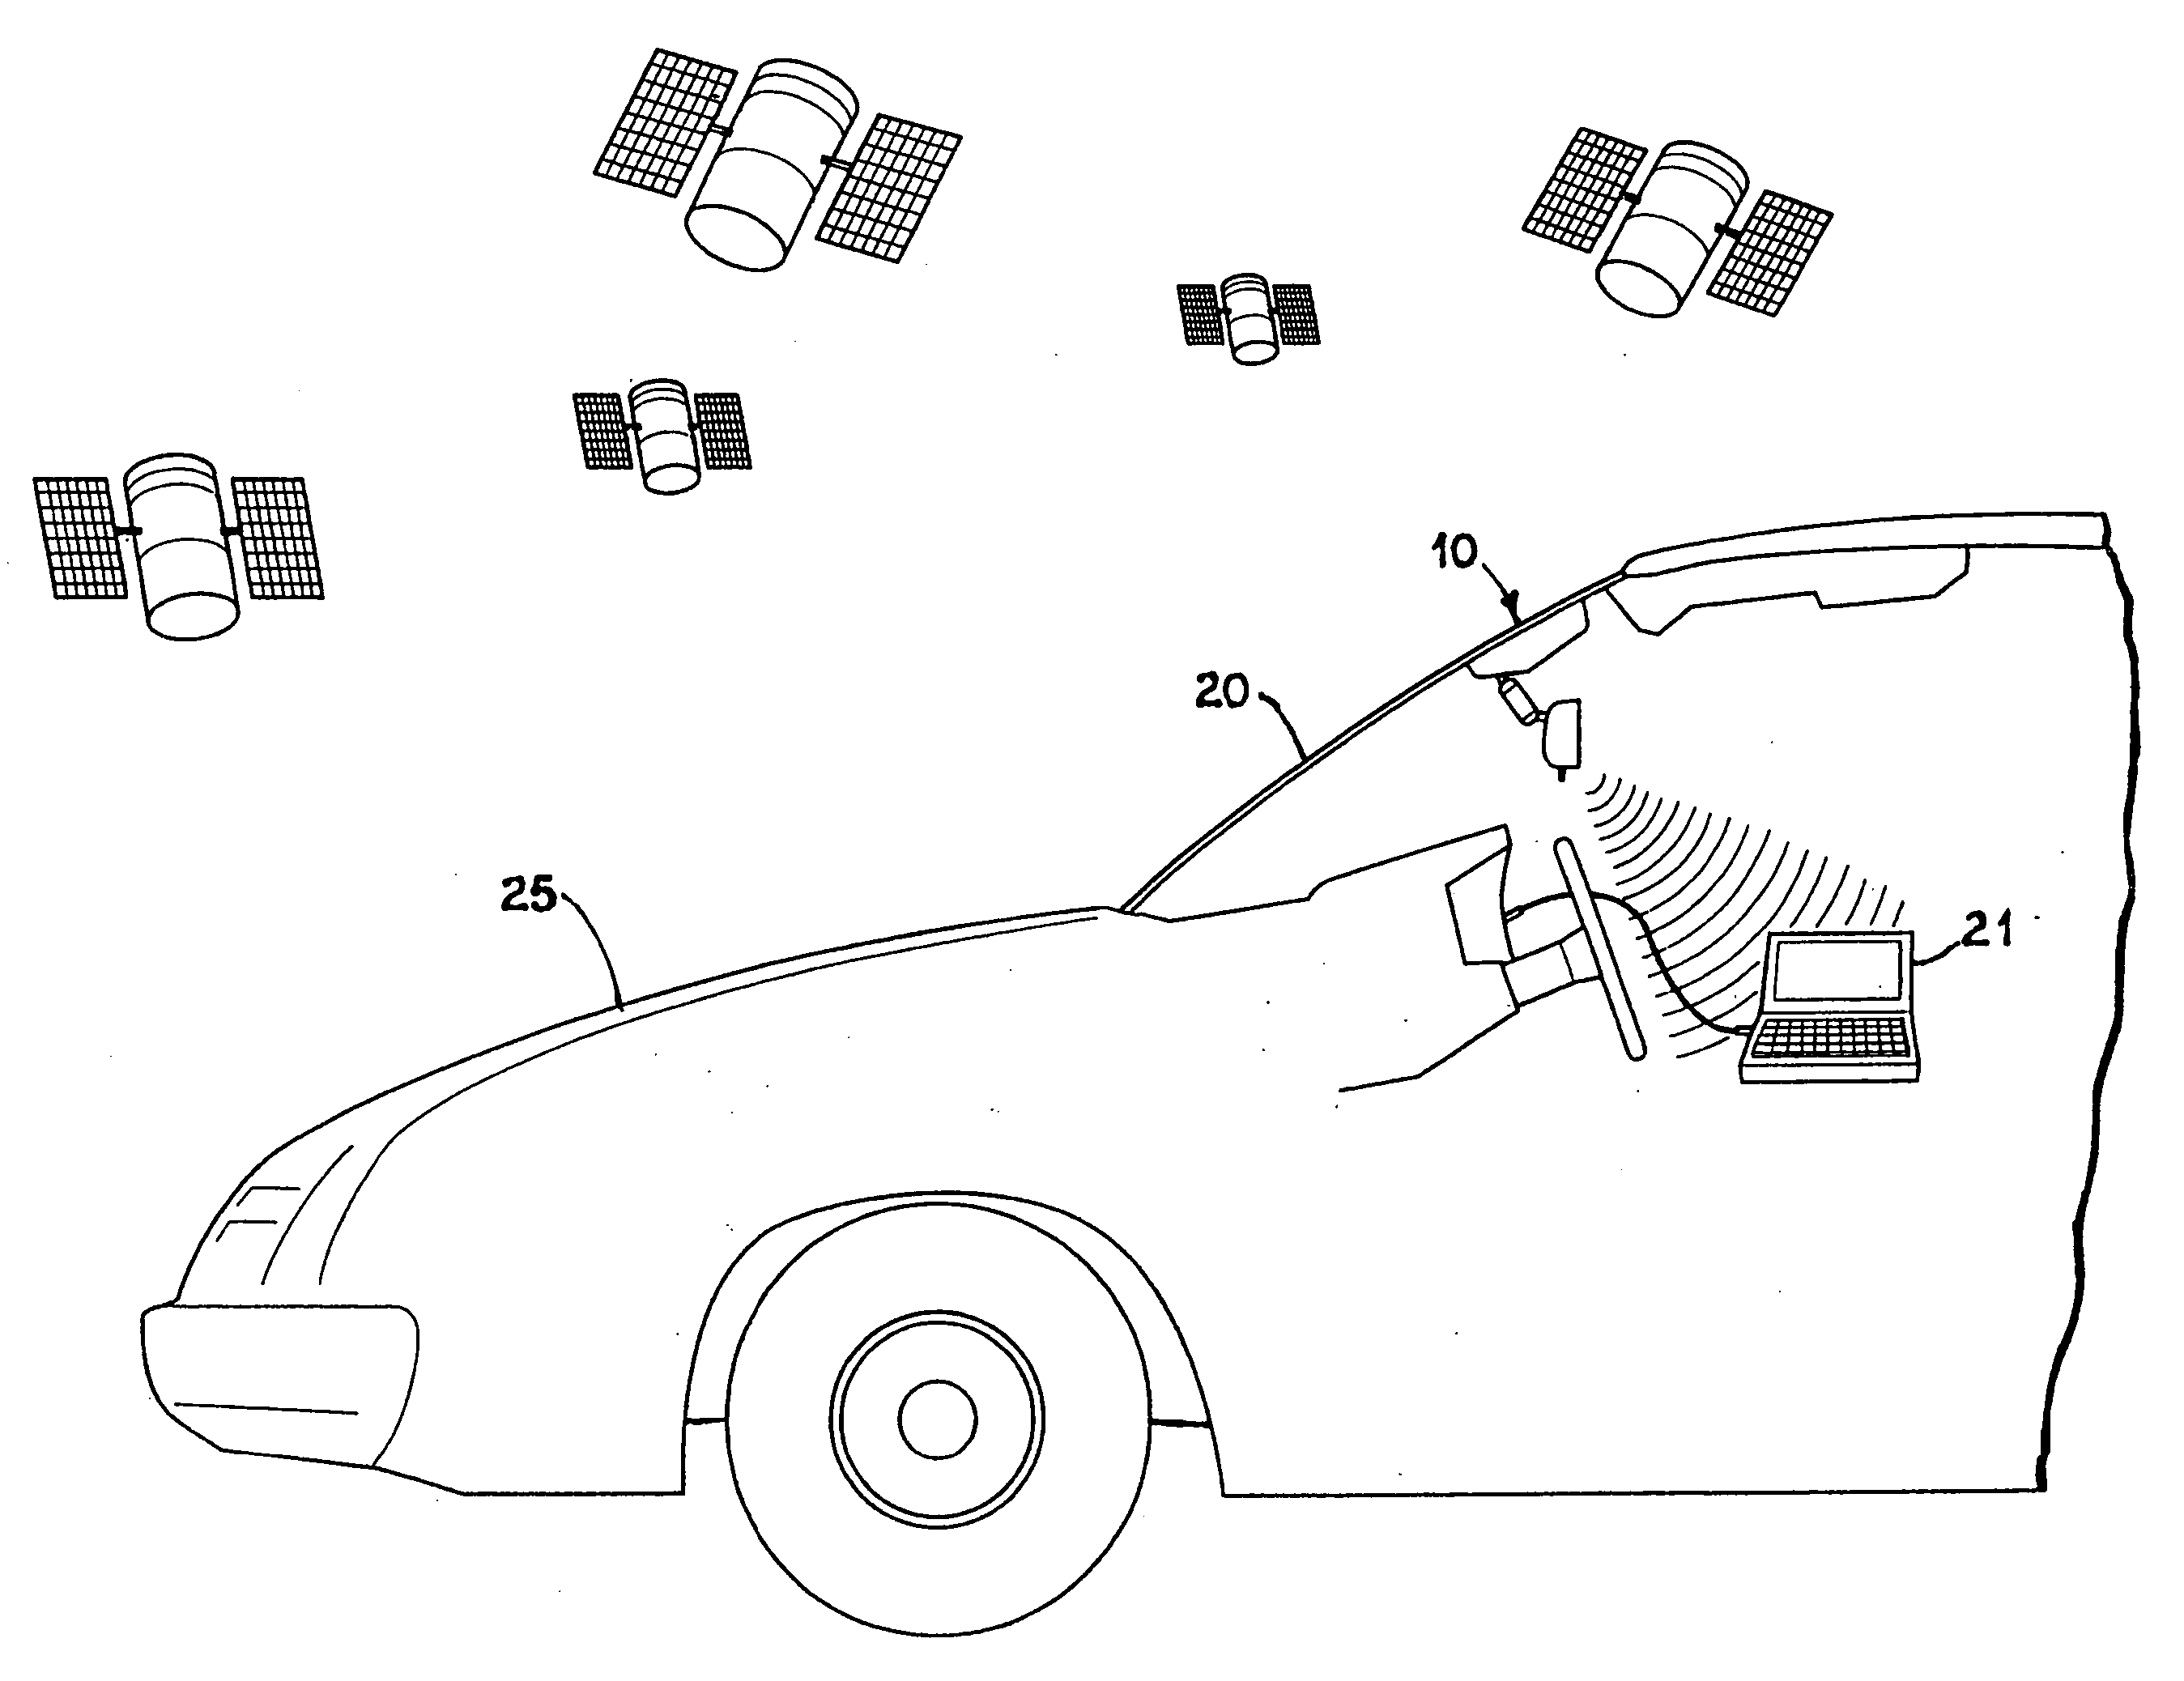 Vehicle rearview mirror assembly incorporating a communication system